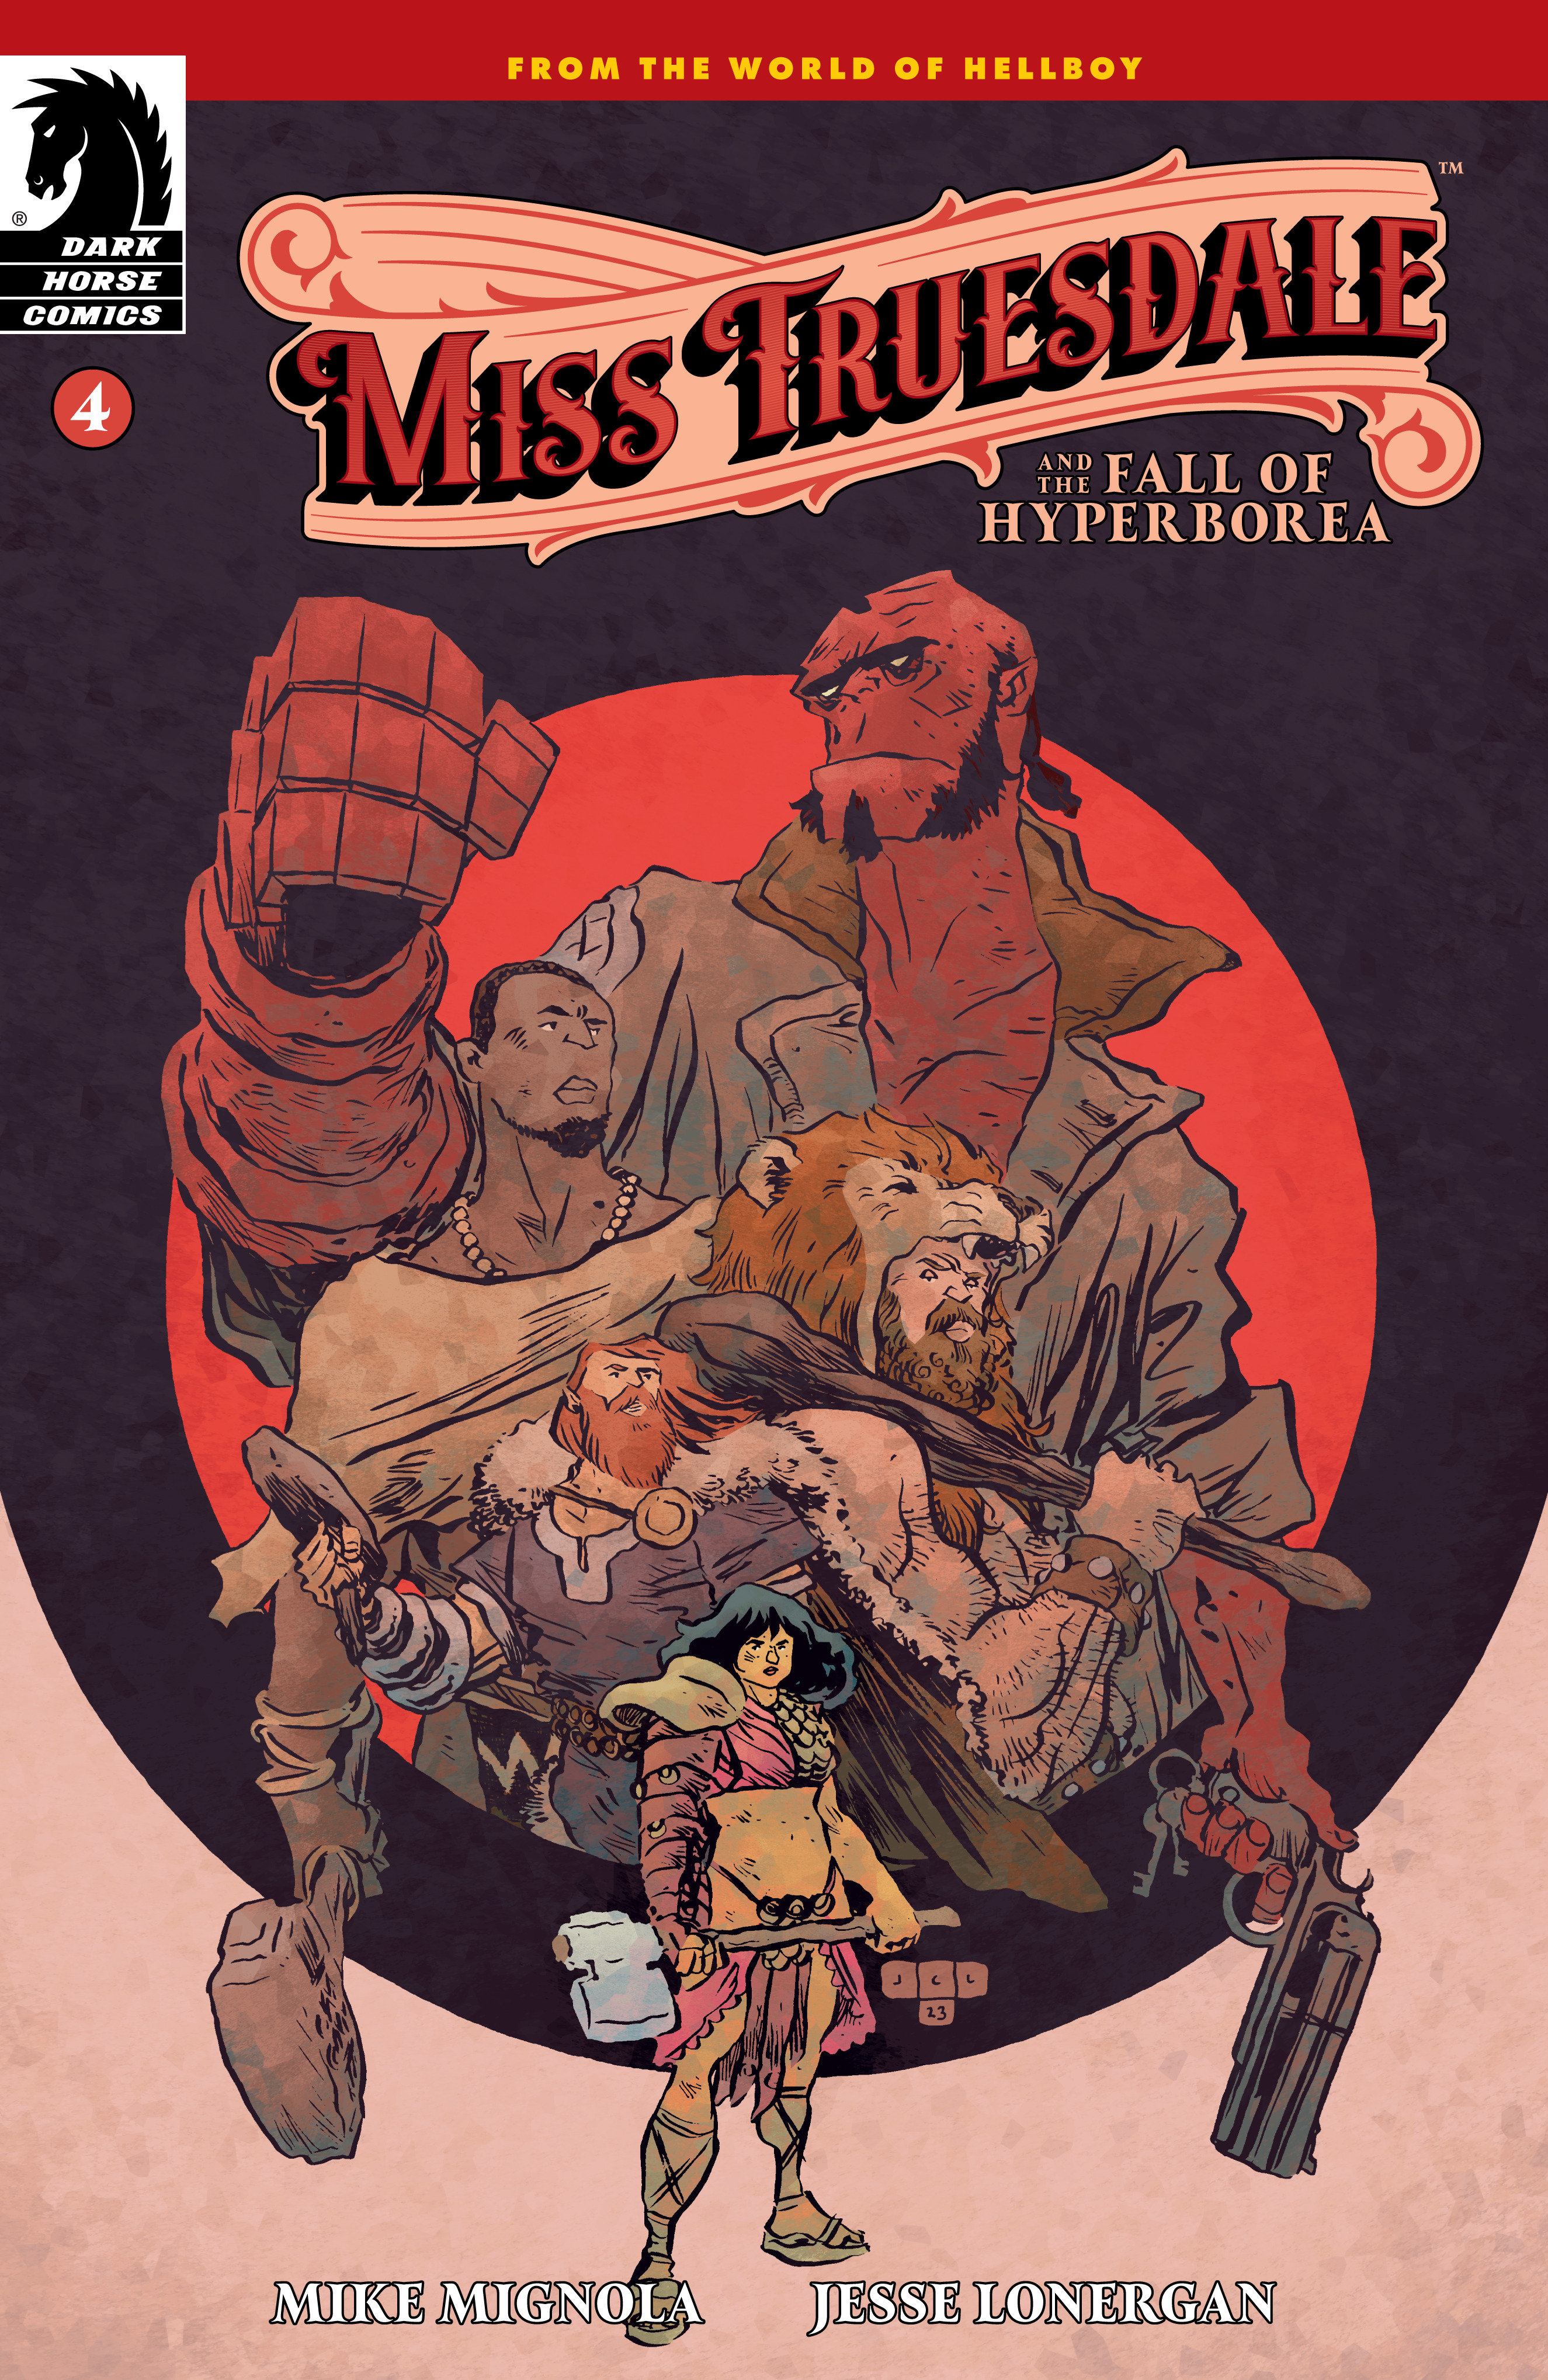 Miss Truesdale and the Fall of Hyperborea #4 Cover A (Jess Lonergan)